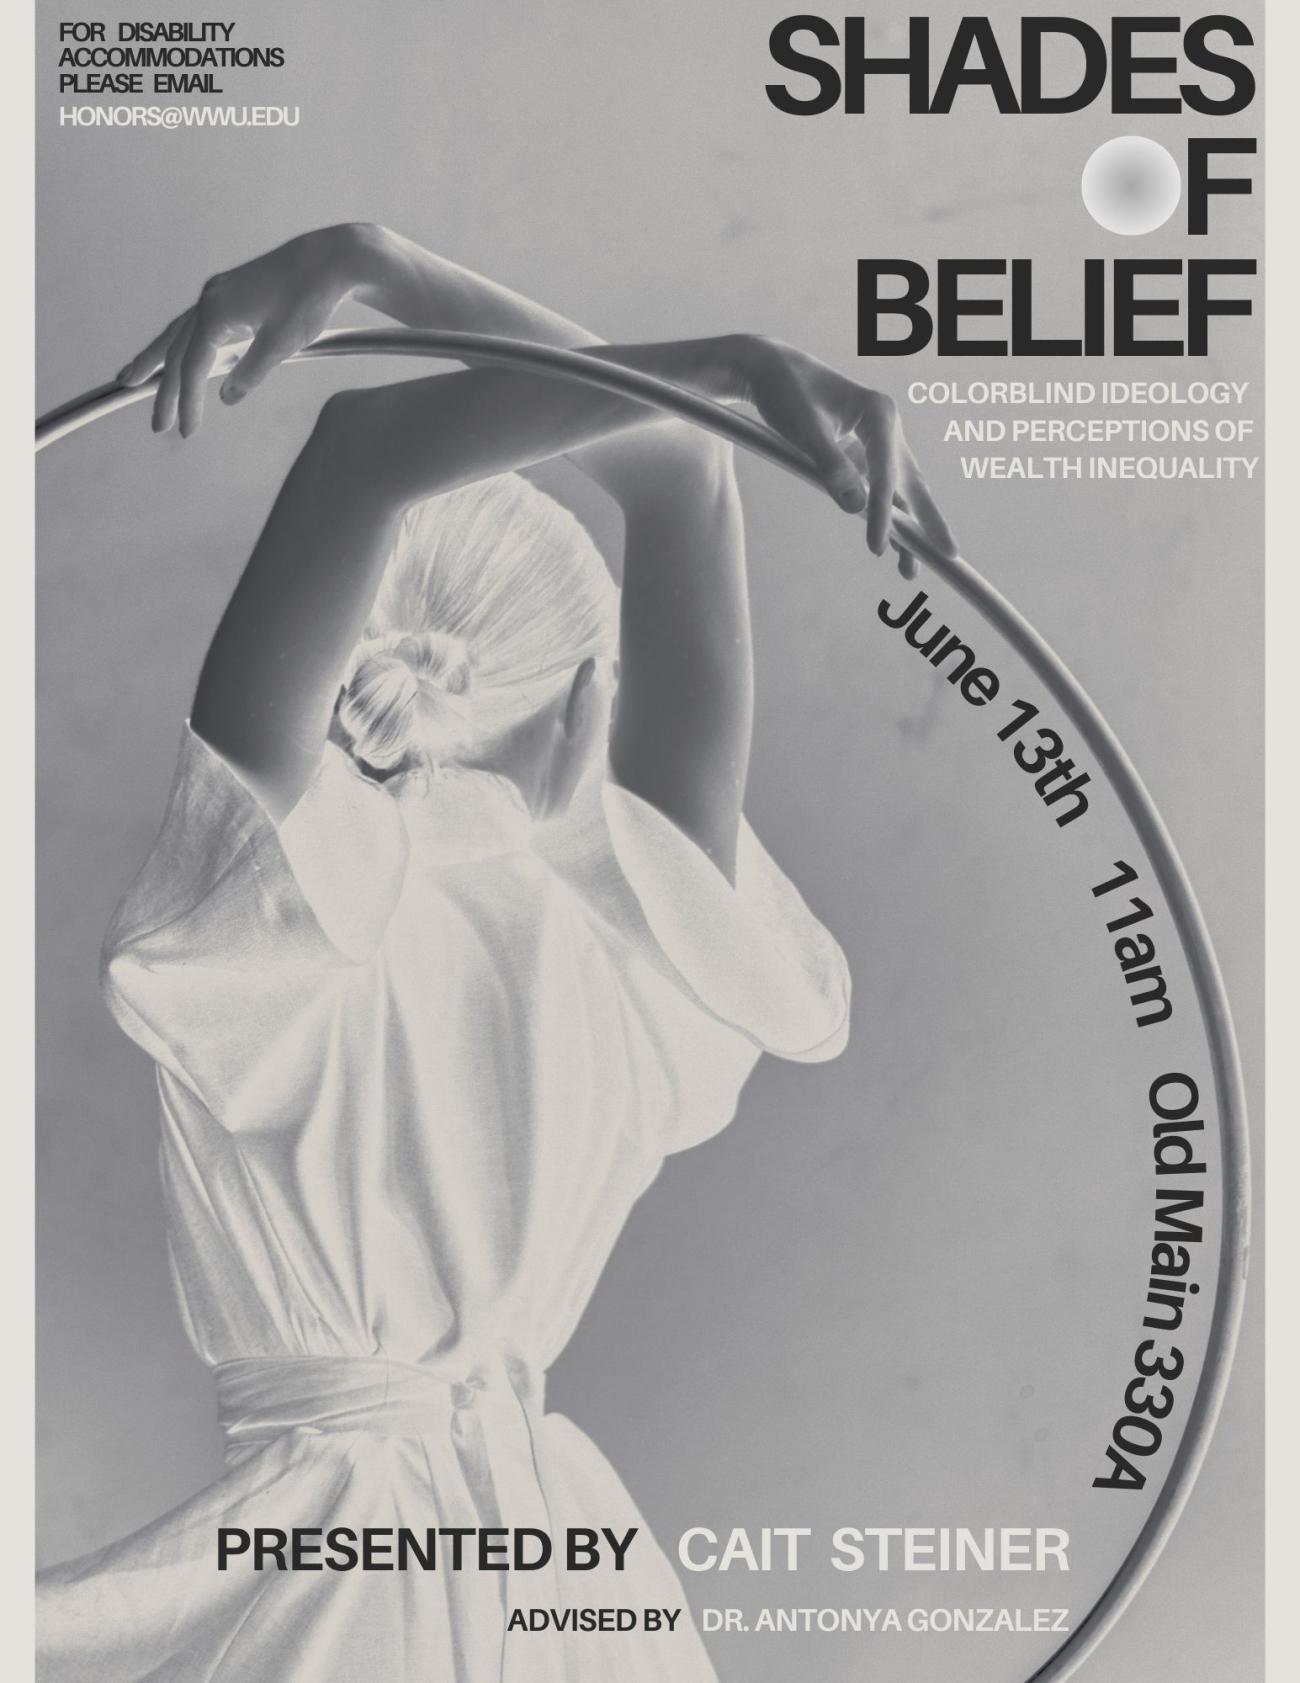 Poster featuring a greyscale image of a dancer from the waist up, facing away from the camera, holding a hula hoop over her head with her crossed arms. She wears a flowing dress and has her hair tied in a low bun. Text overlaid reads: “Shades of Belief: Colorblind Ideology and perceptions of wealth inequality. June 13th at 11 am in Old Main 330A. Presented by Cait Steiner. Advised by Antonya Gonzalez. For disability accommodations please email honors@wwu.edu.”